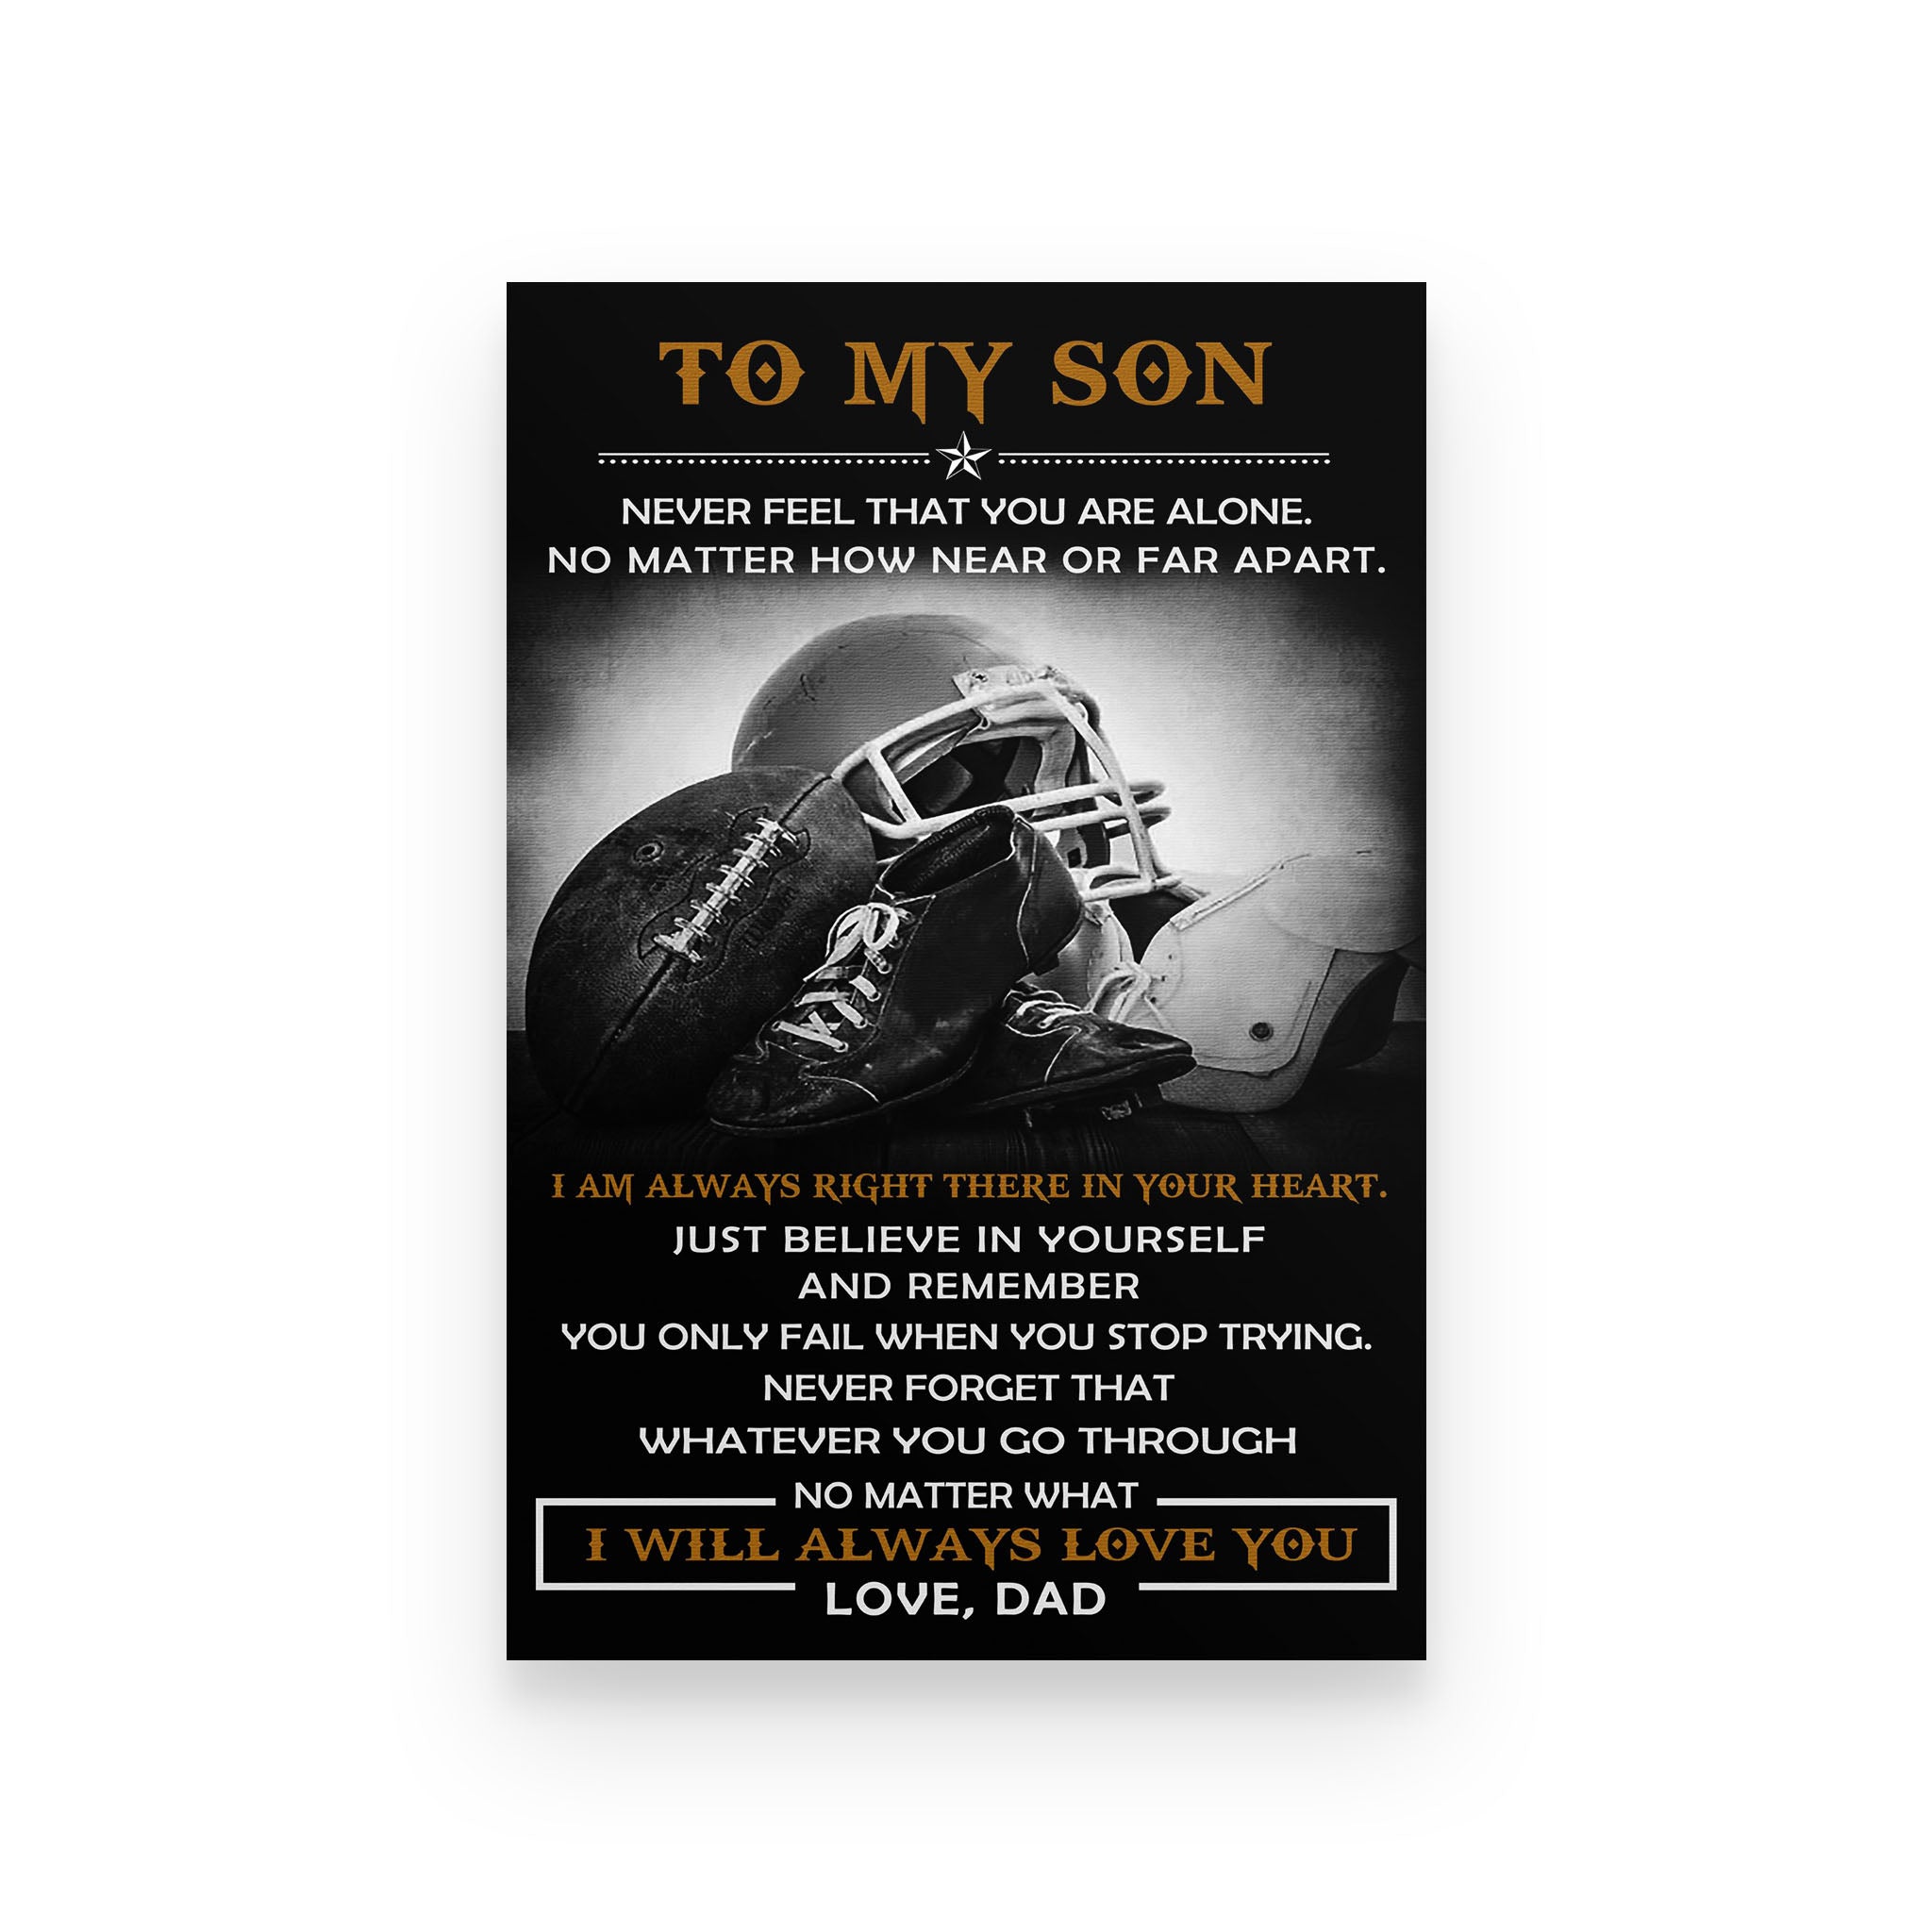 American football poster dad to son never feel that you are alone vs2